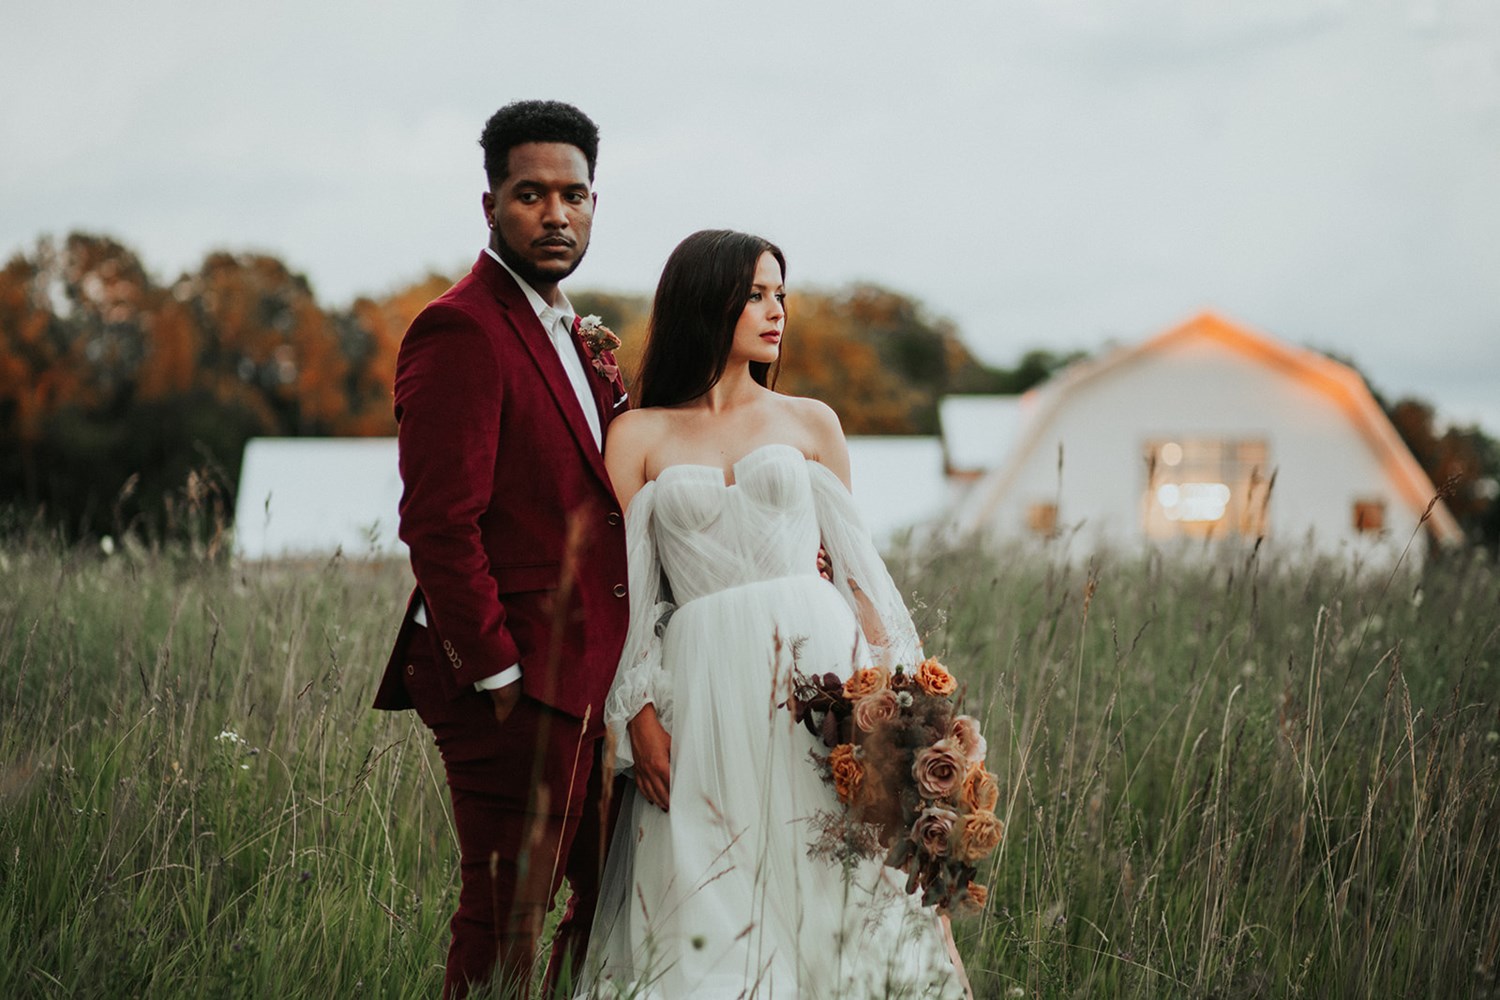 Main Picture: Eclectic Farmhouse Micro Wedding Inspiration | Wedding Vault